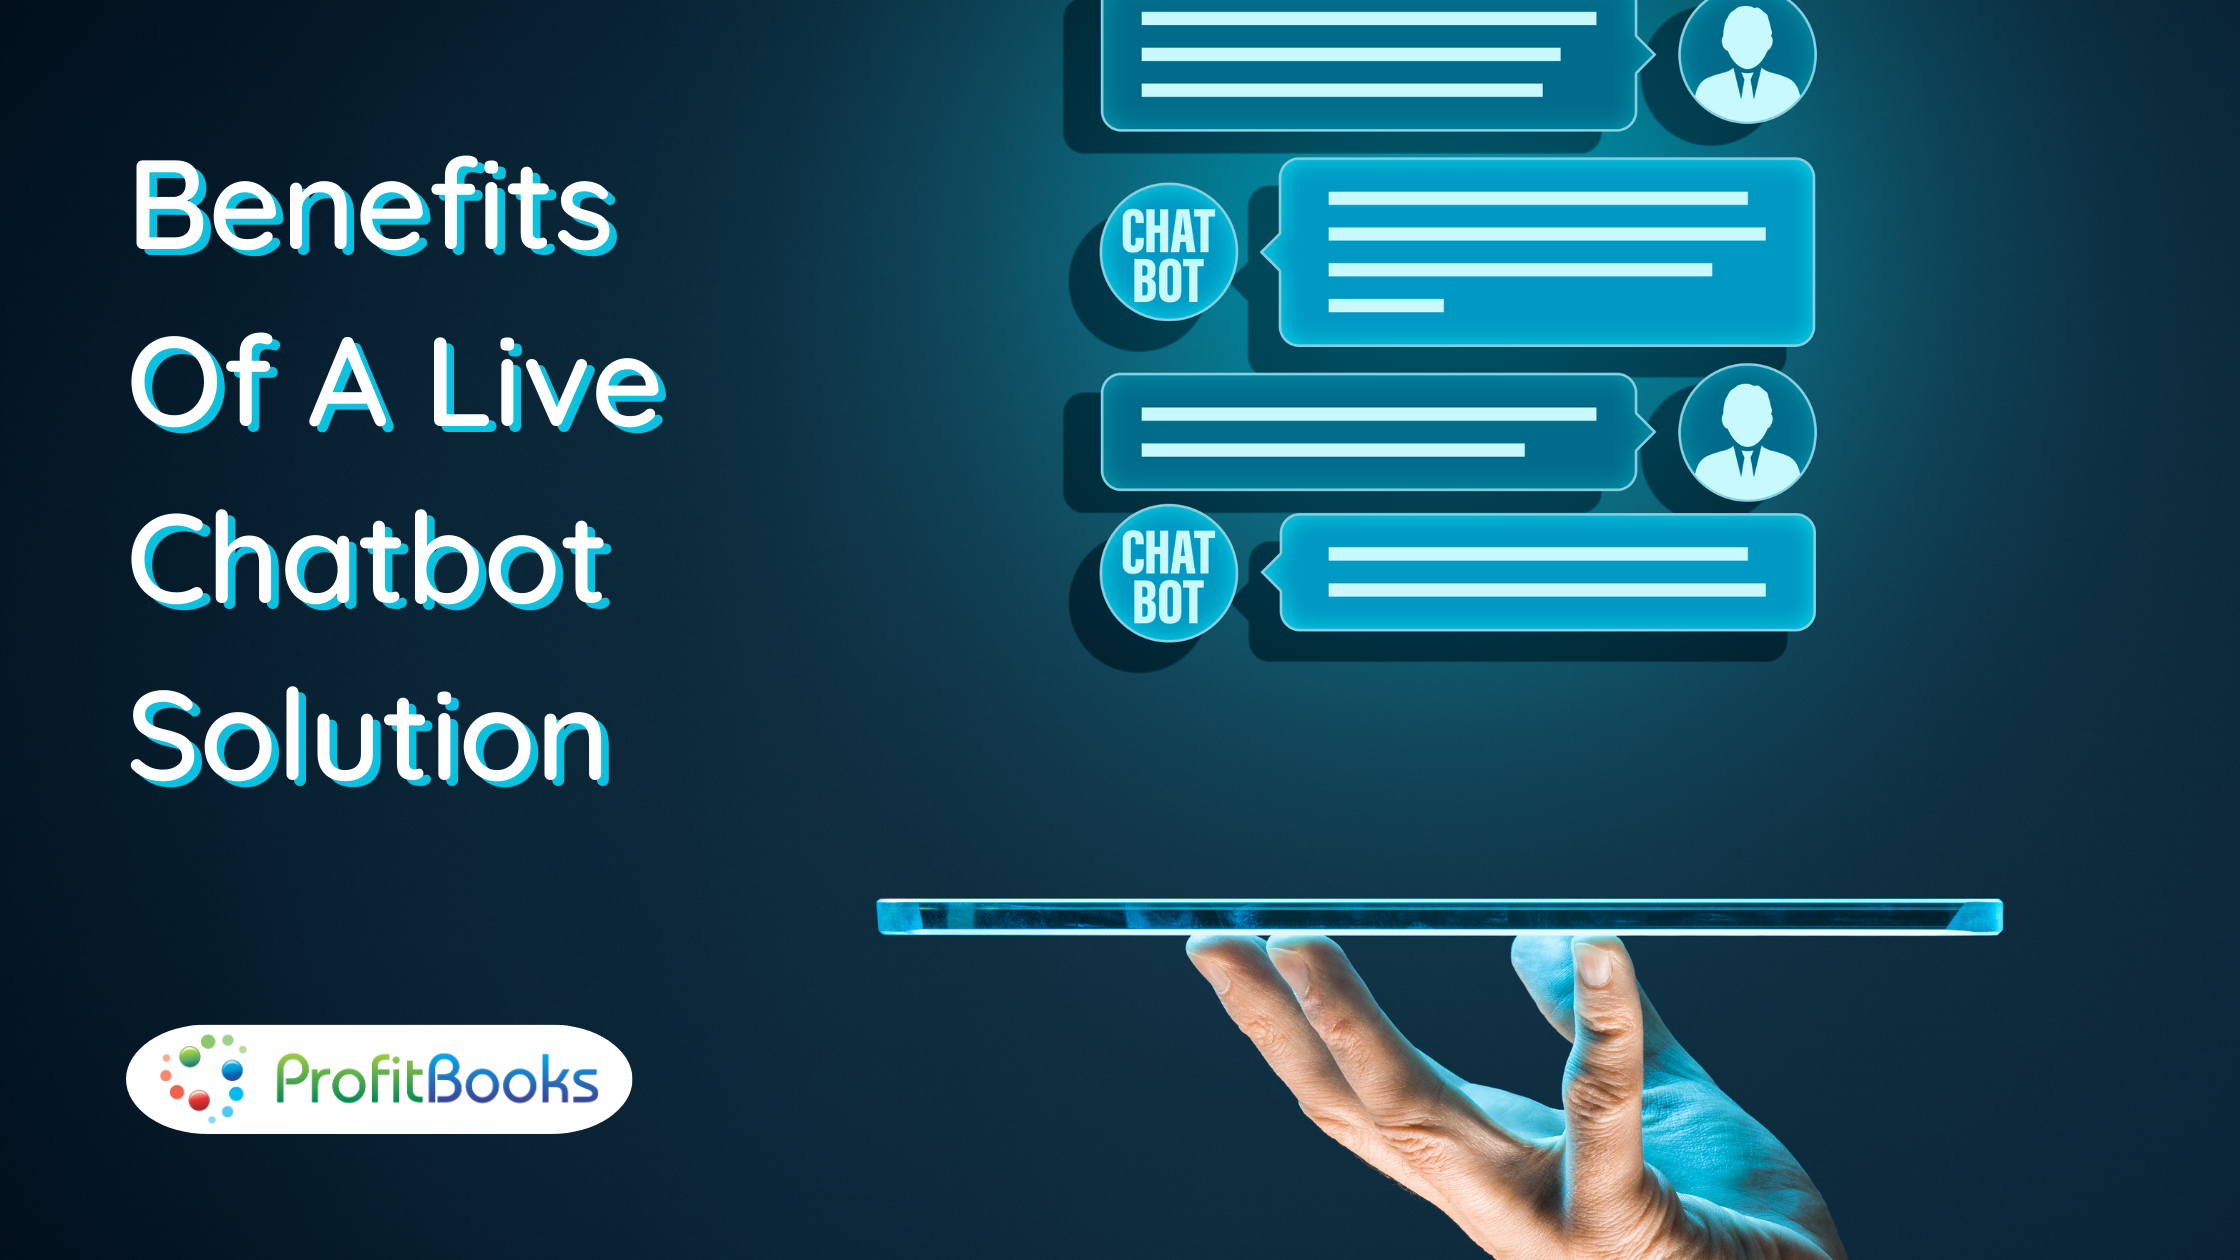 Benefits of a live chatbot solution